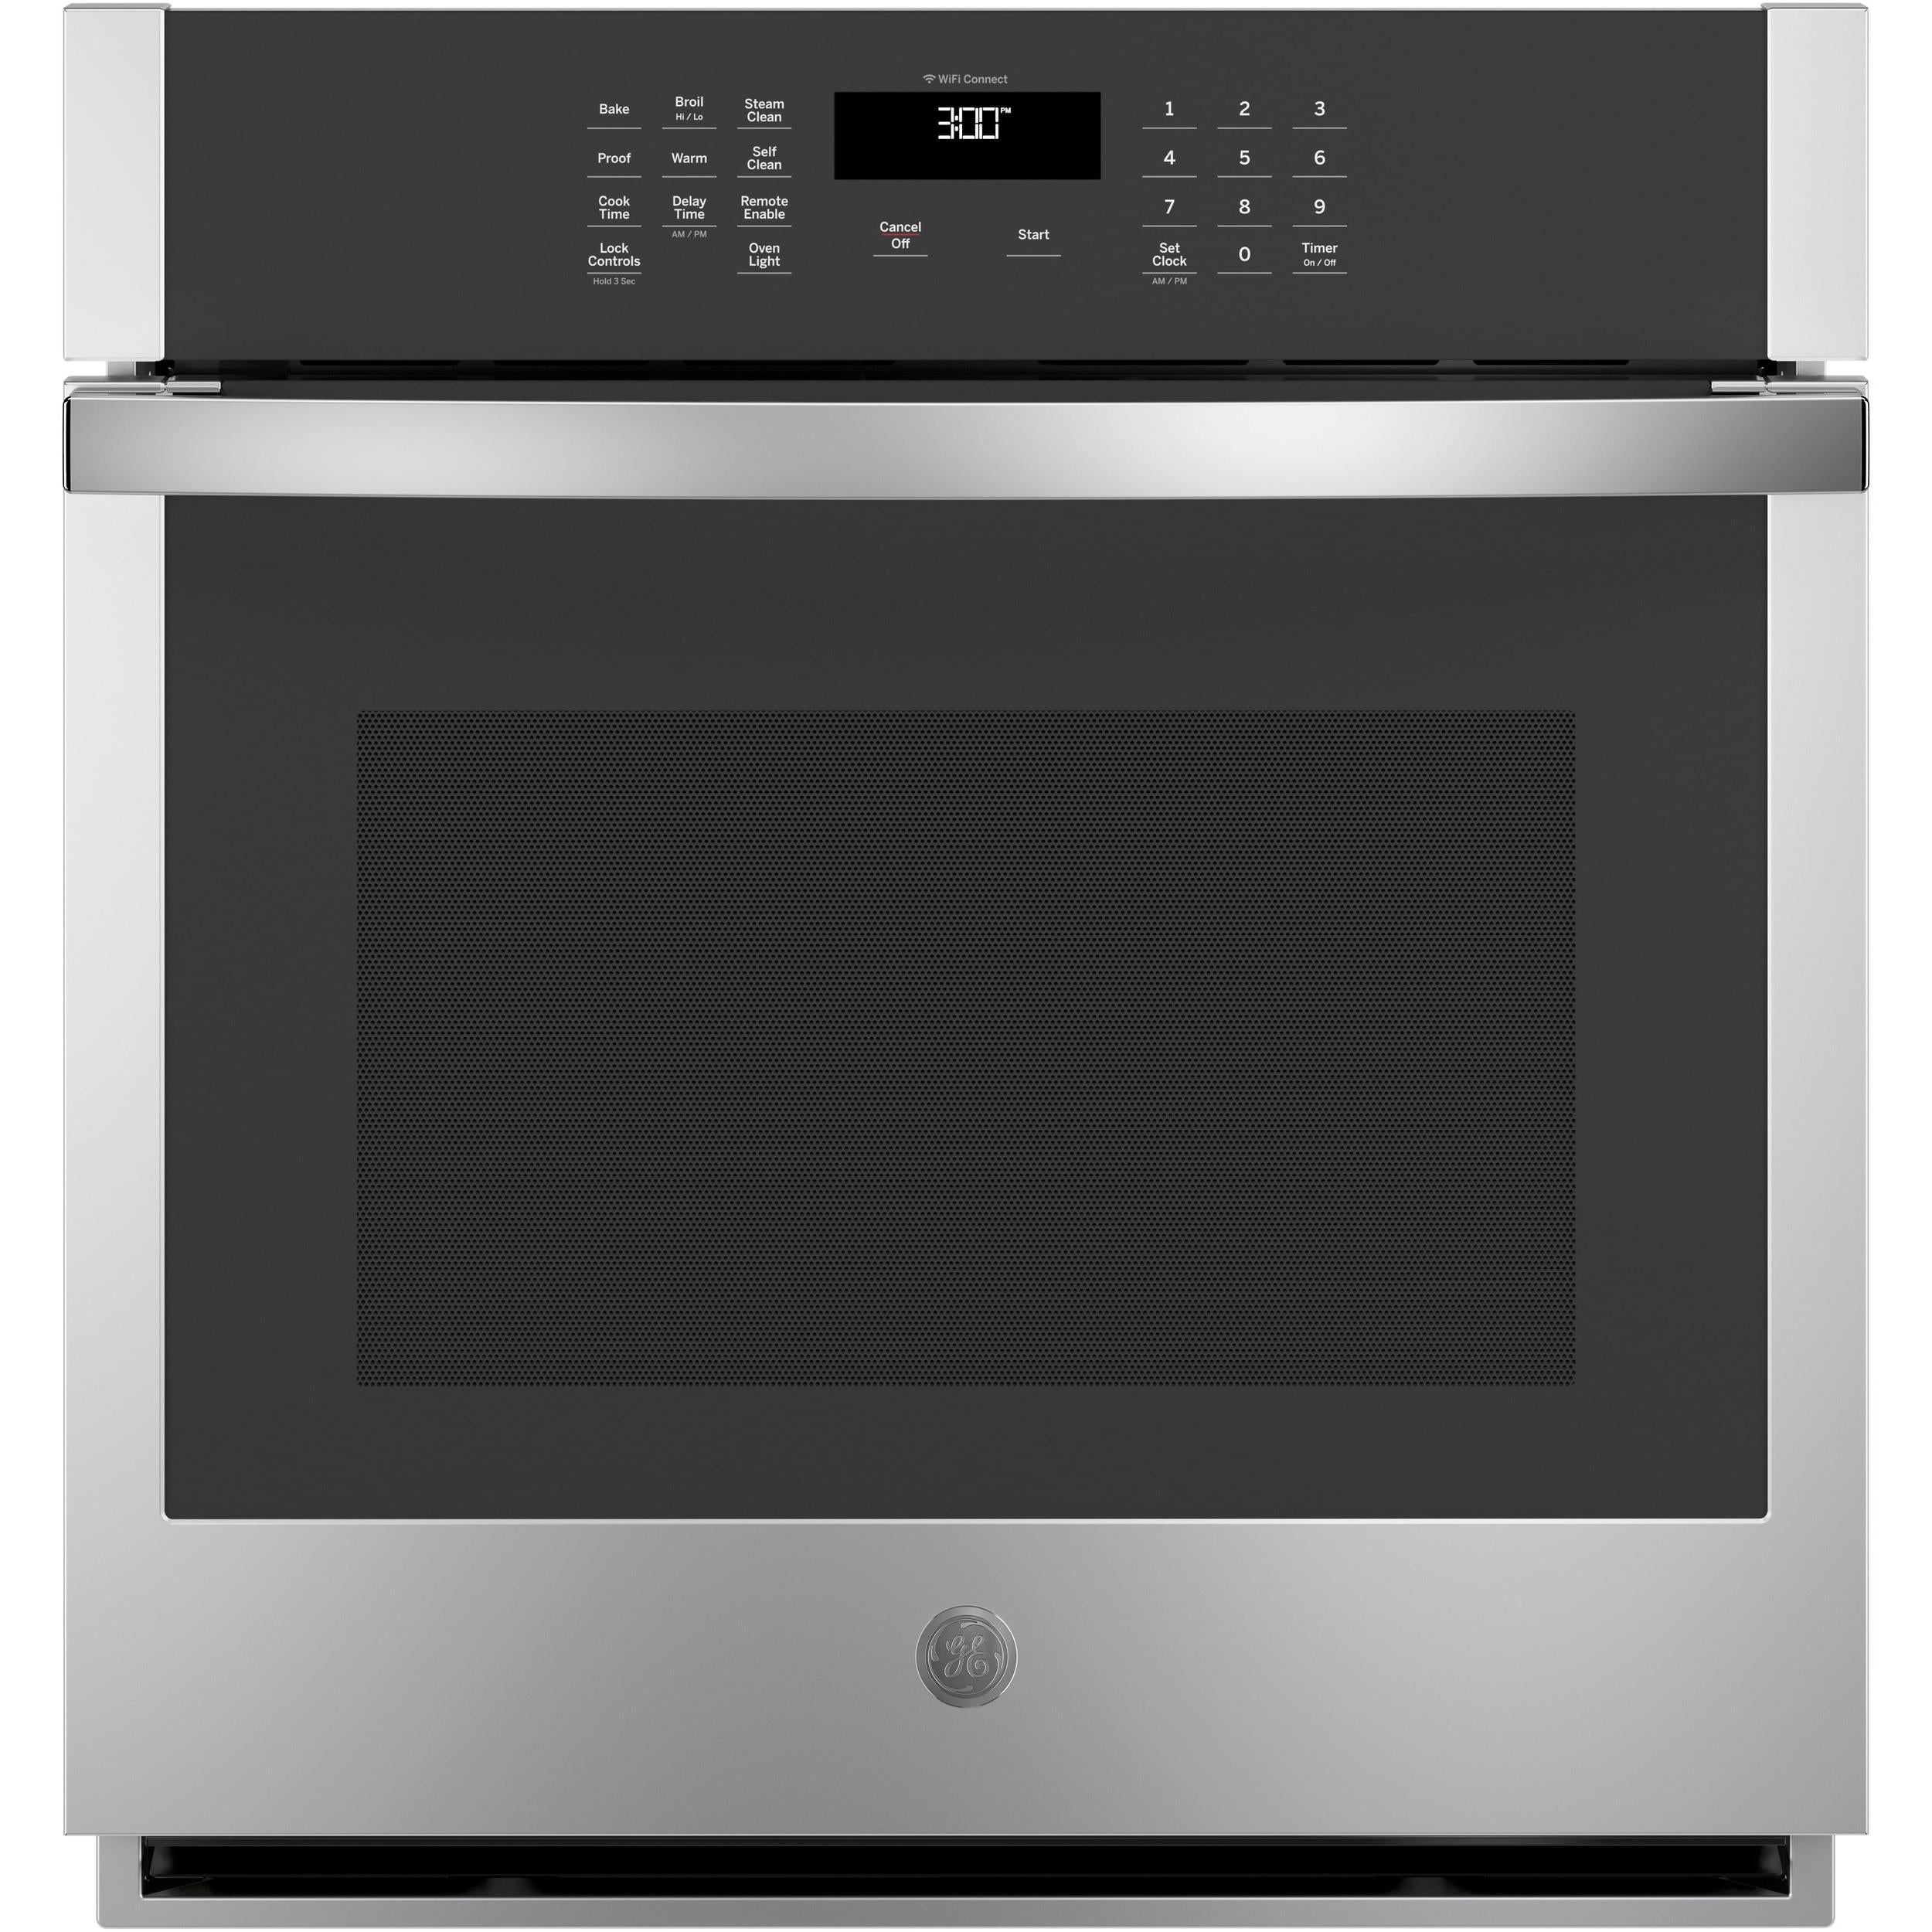 GE 27-inch, 4.3 cu. ft. Built-in Single Wall Oven JKS3000SNSS